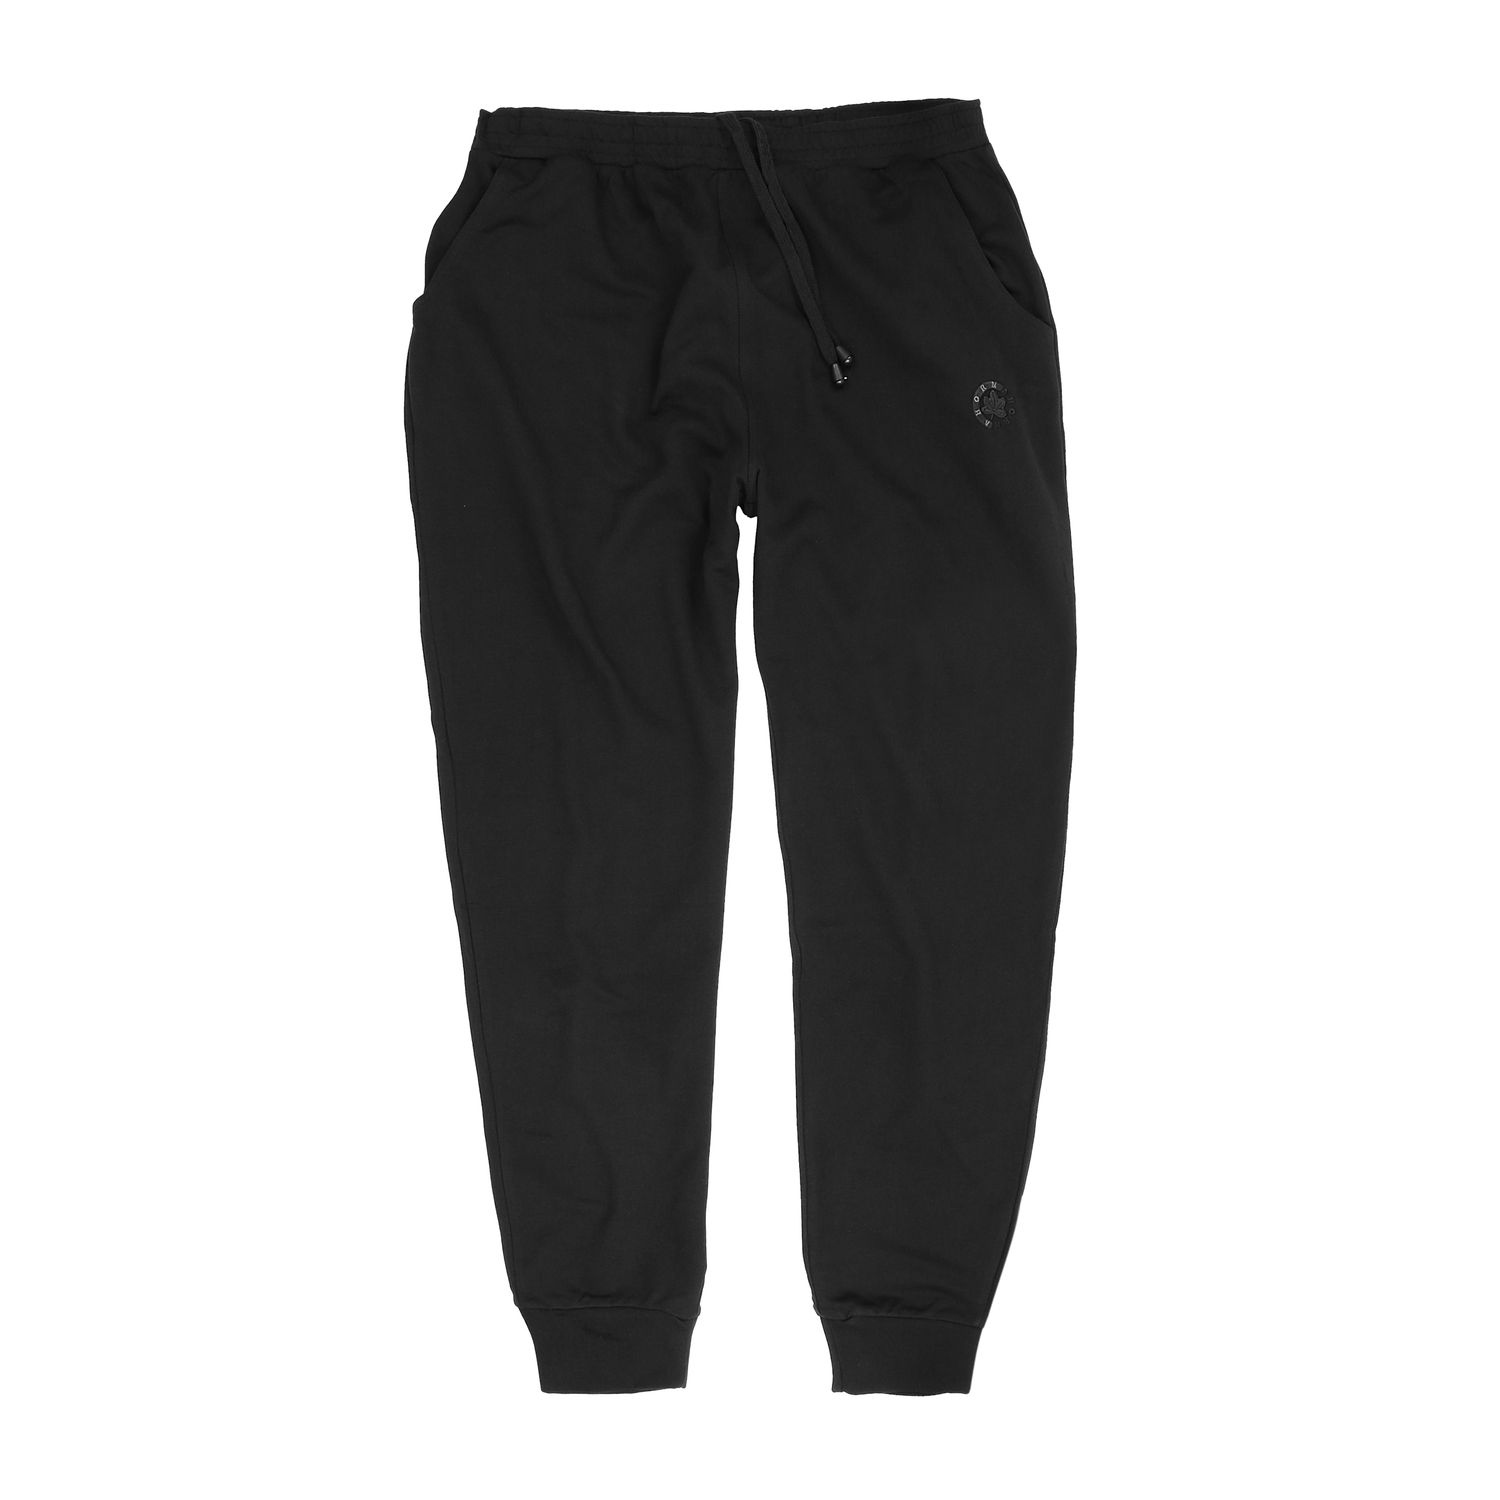 Sweat pants in black for men by Ahorn Sportswear in oversizes up to 10XL